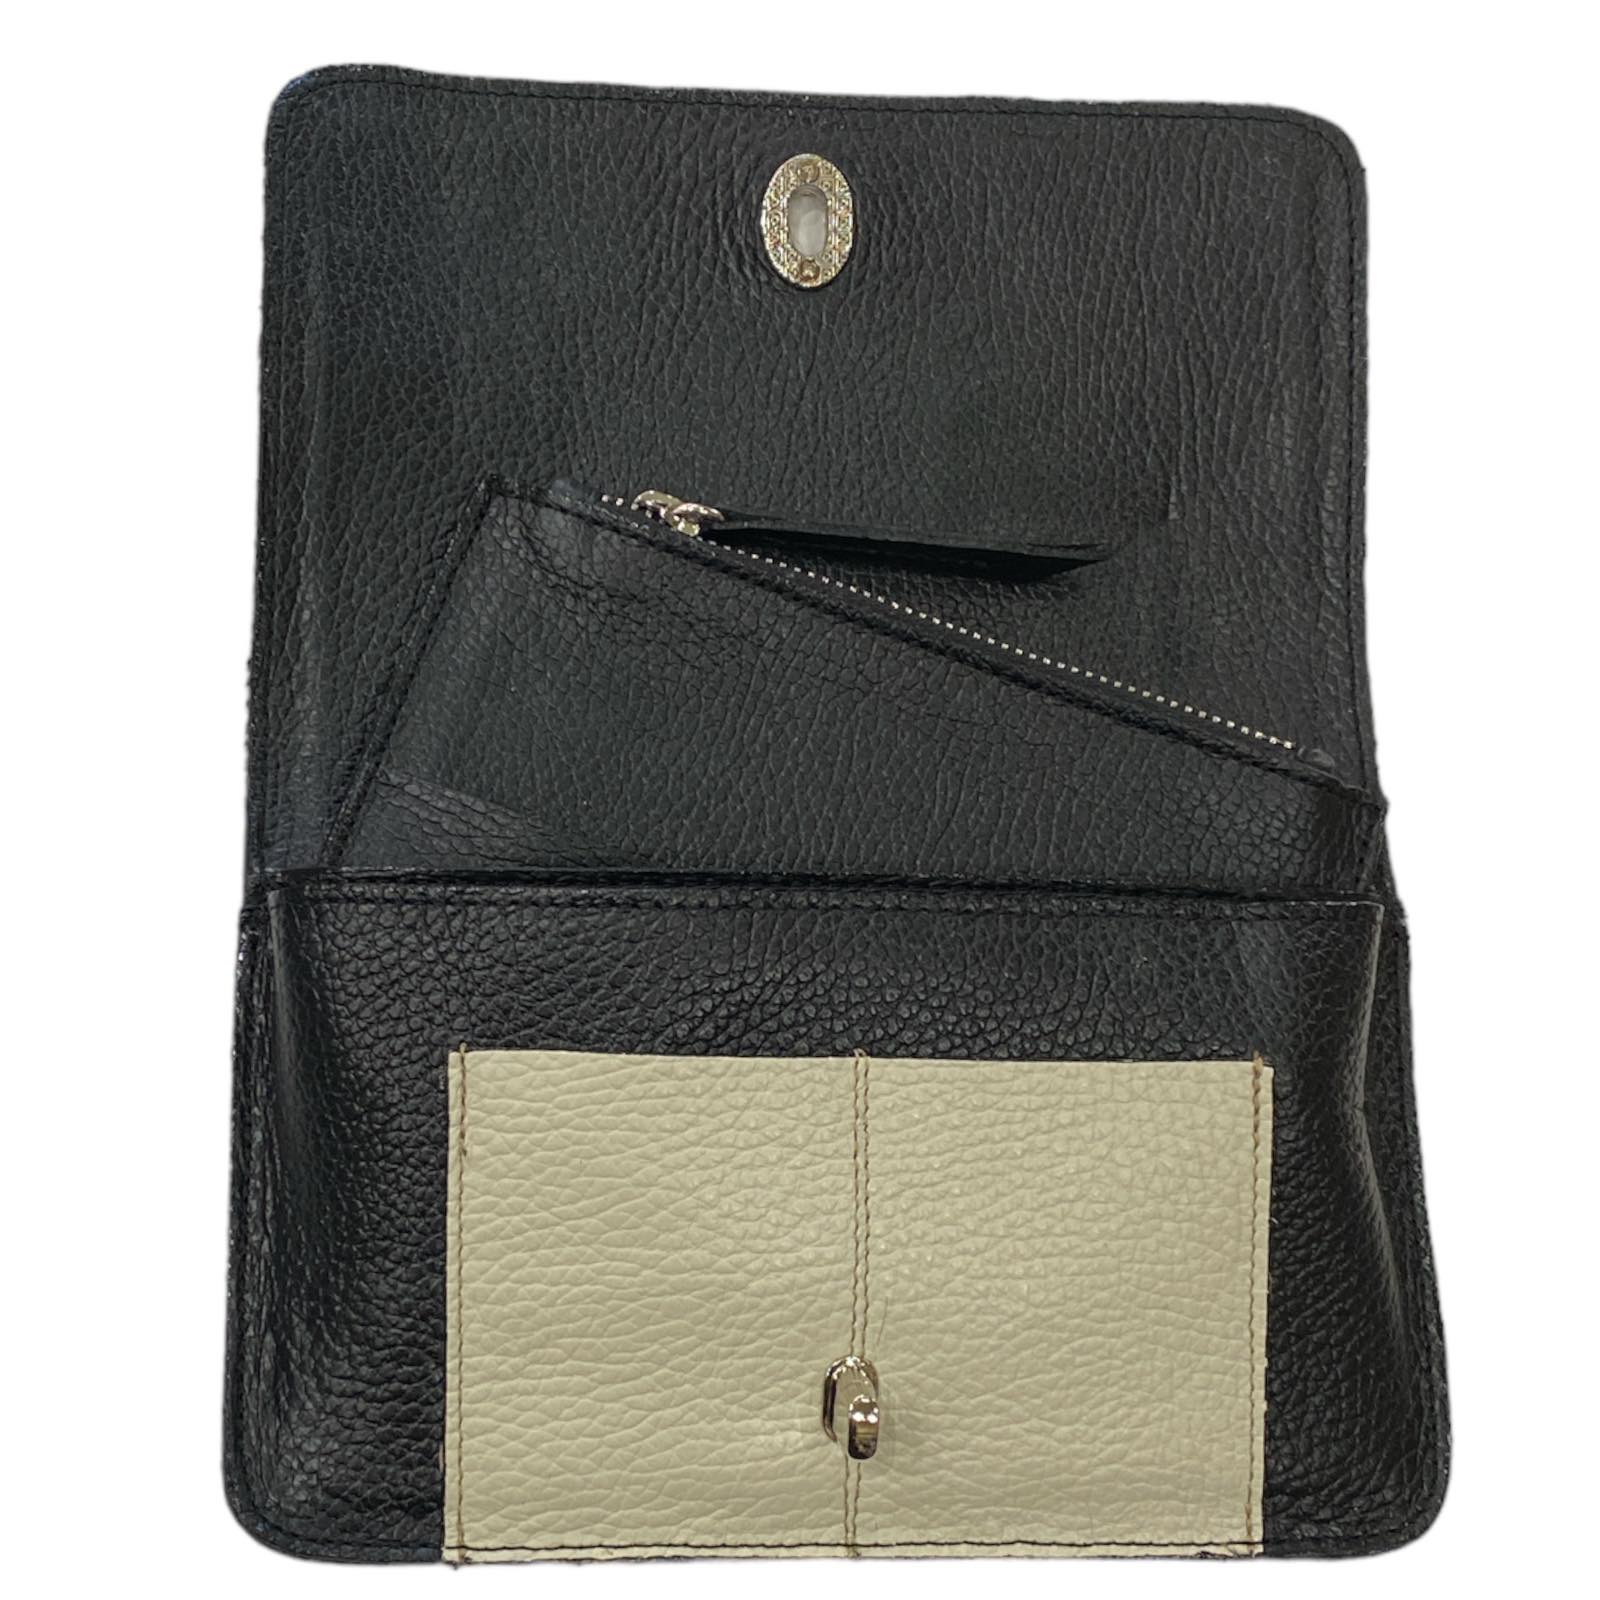 Black and white calf-hair leather multi wallet bag